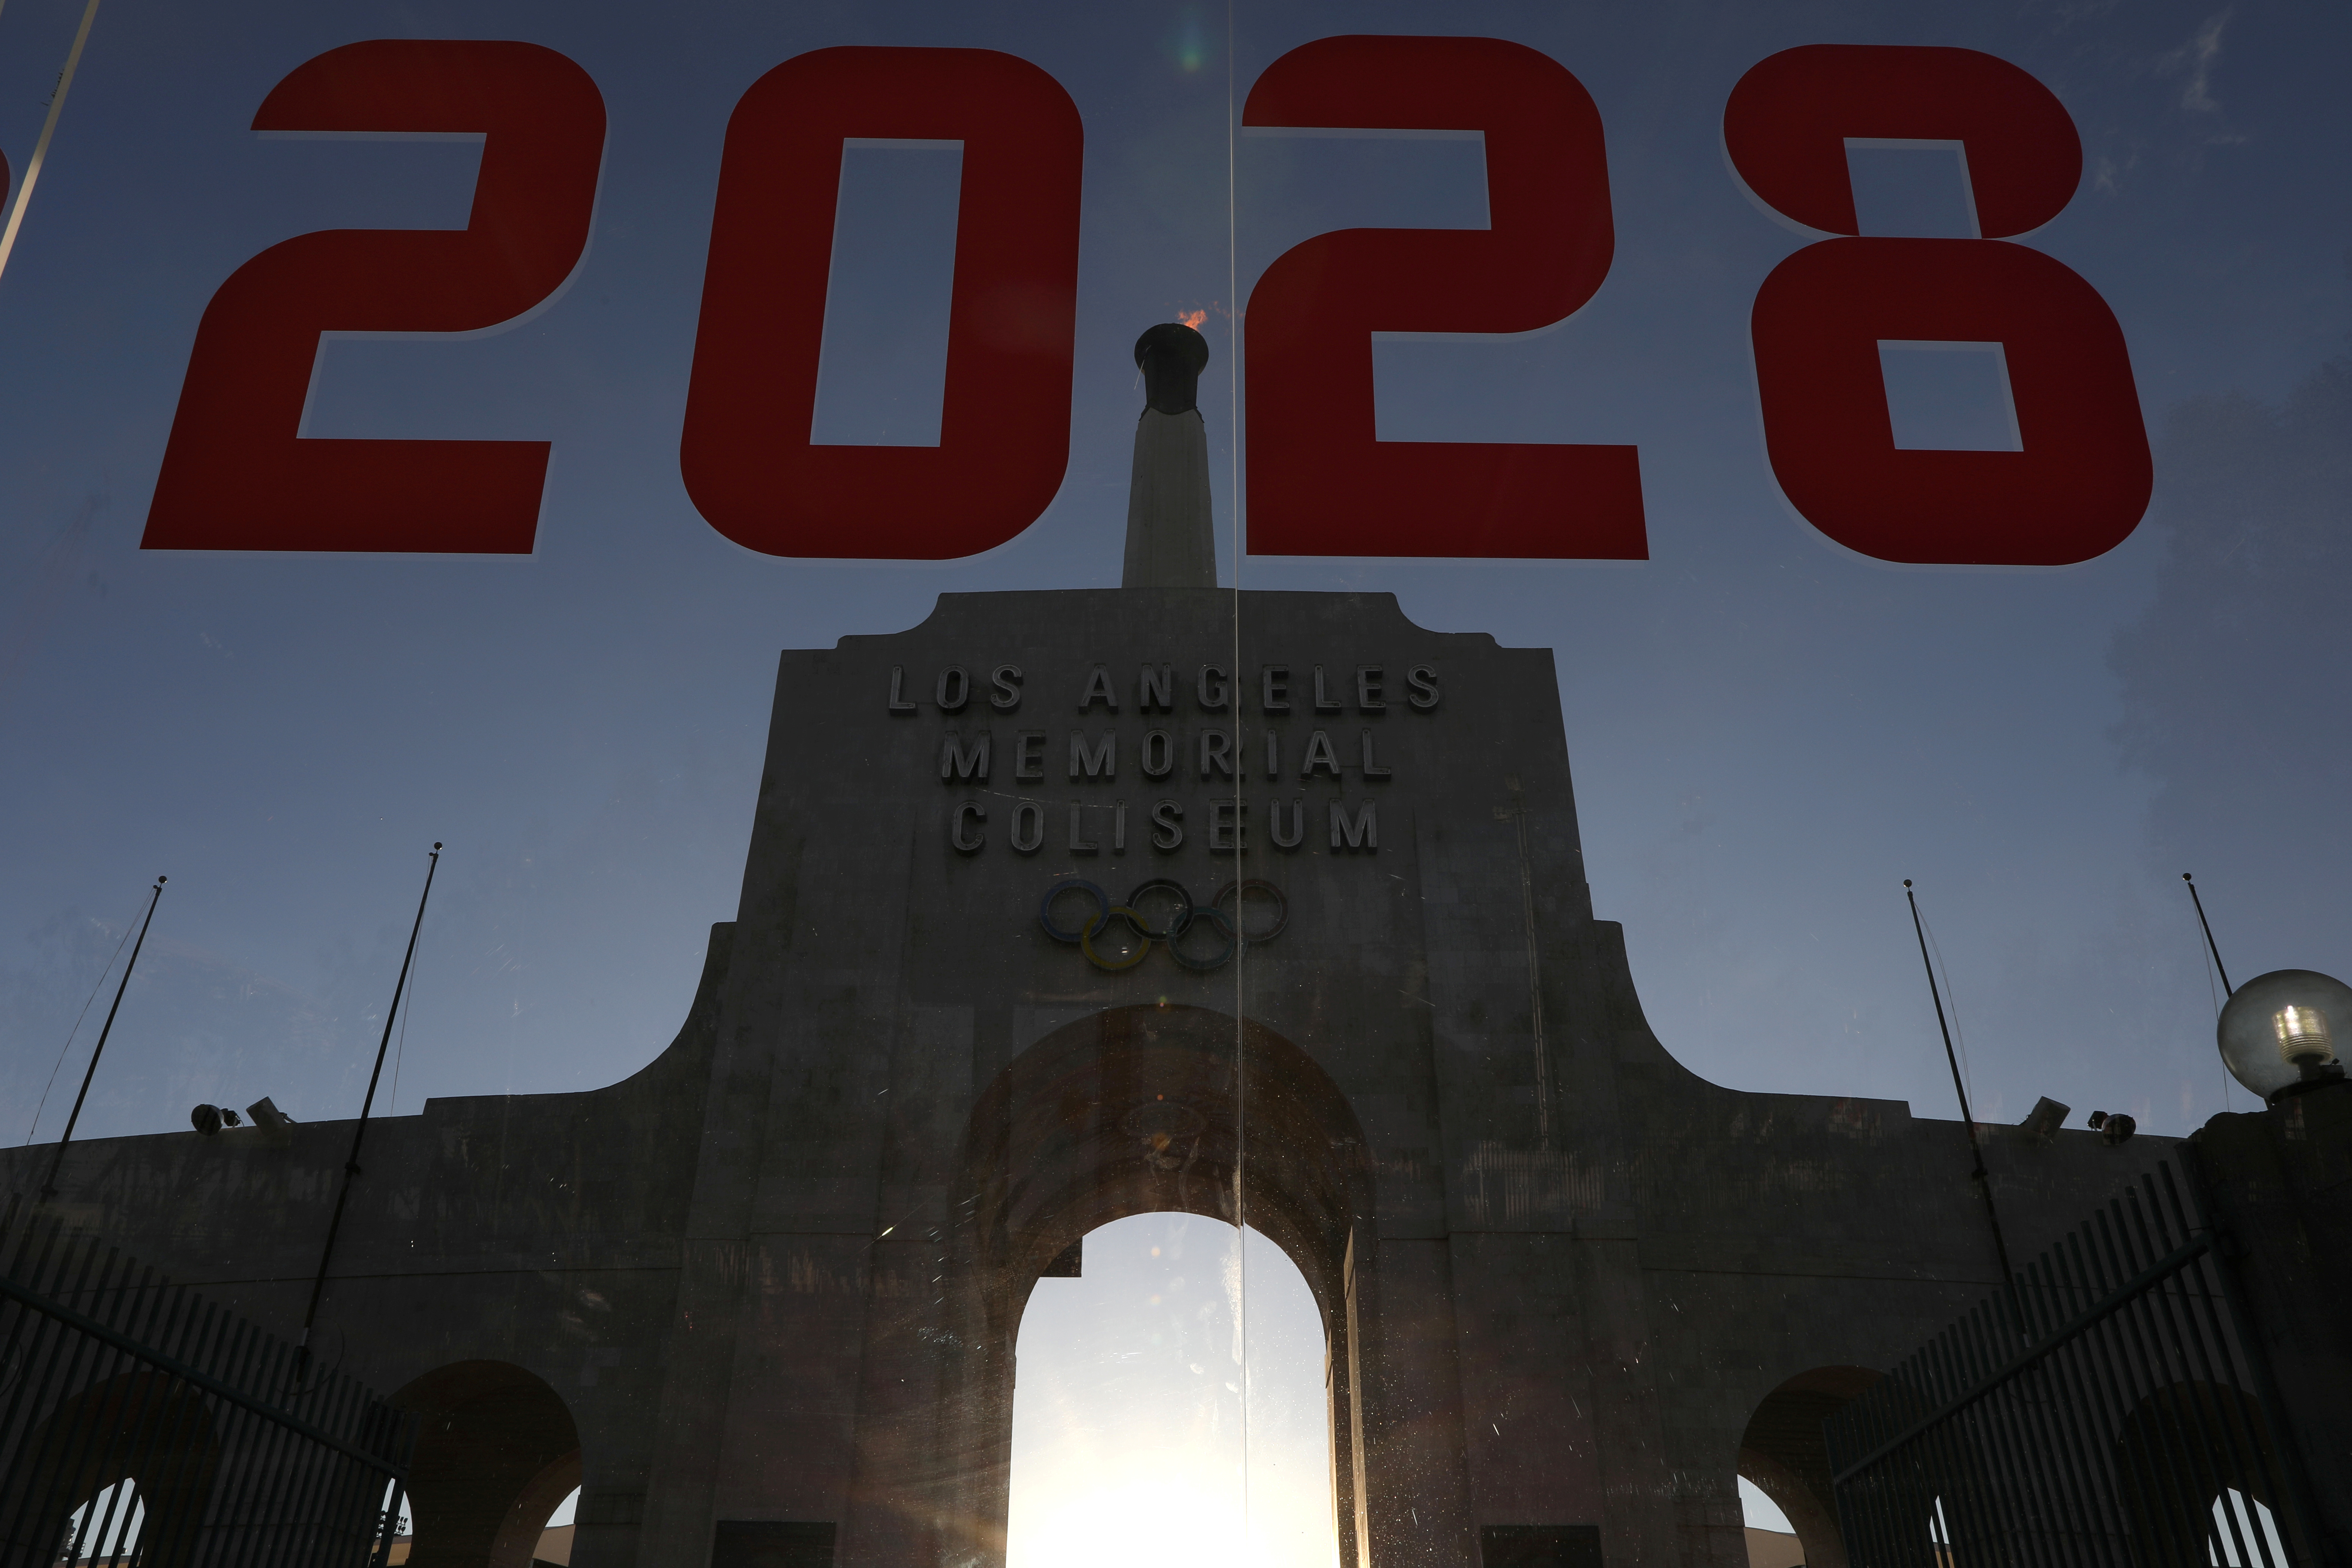 An LA2028 sign is seen at the Los Angeles Coliseum to celebrate Los Angeles being awarded the 2028 Olympic Games, in Los Angeles, California, U.S. REUTERS/Lucy Nicholson/File Photo